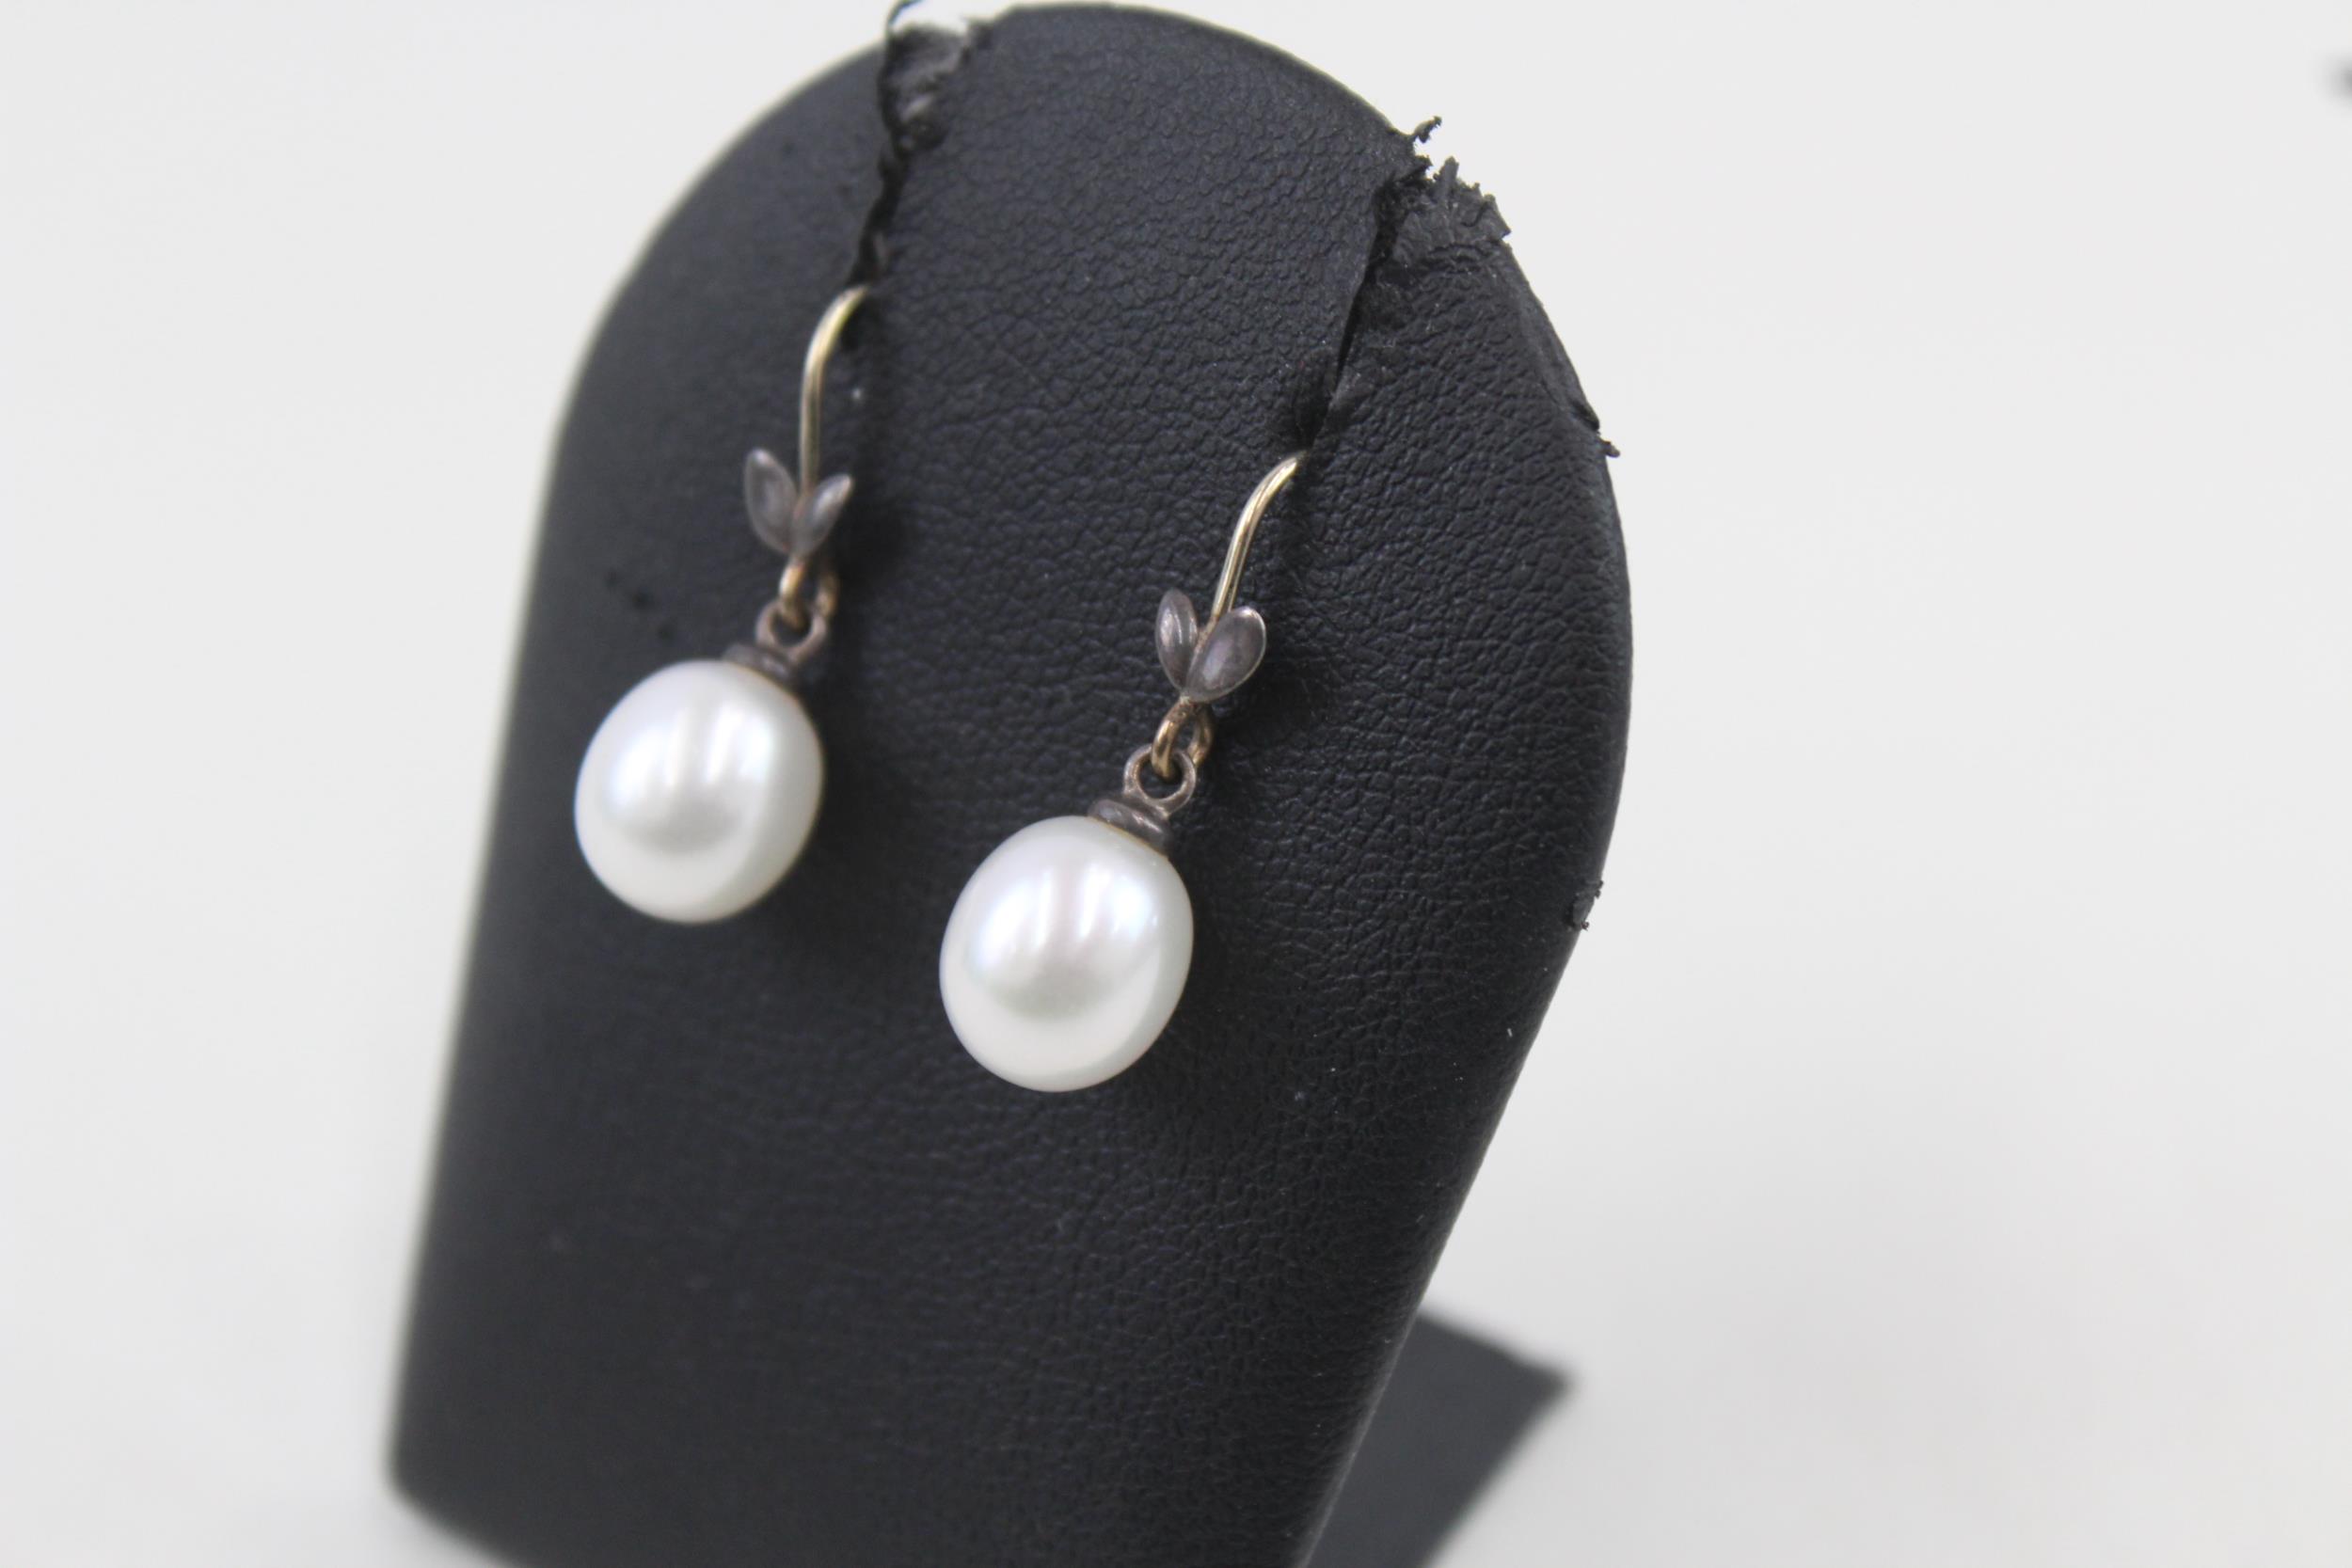 Pair of silver cultured pearl drop earrings by designer Tiffany & Co (3g) - Image 5 of 6